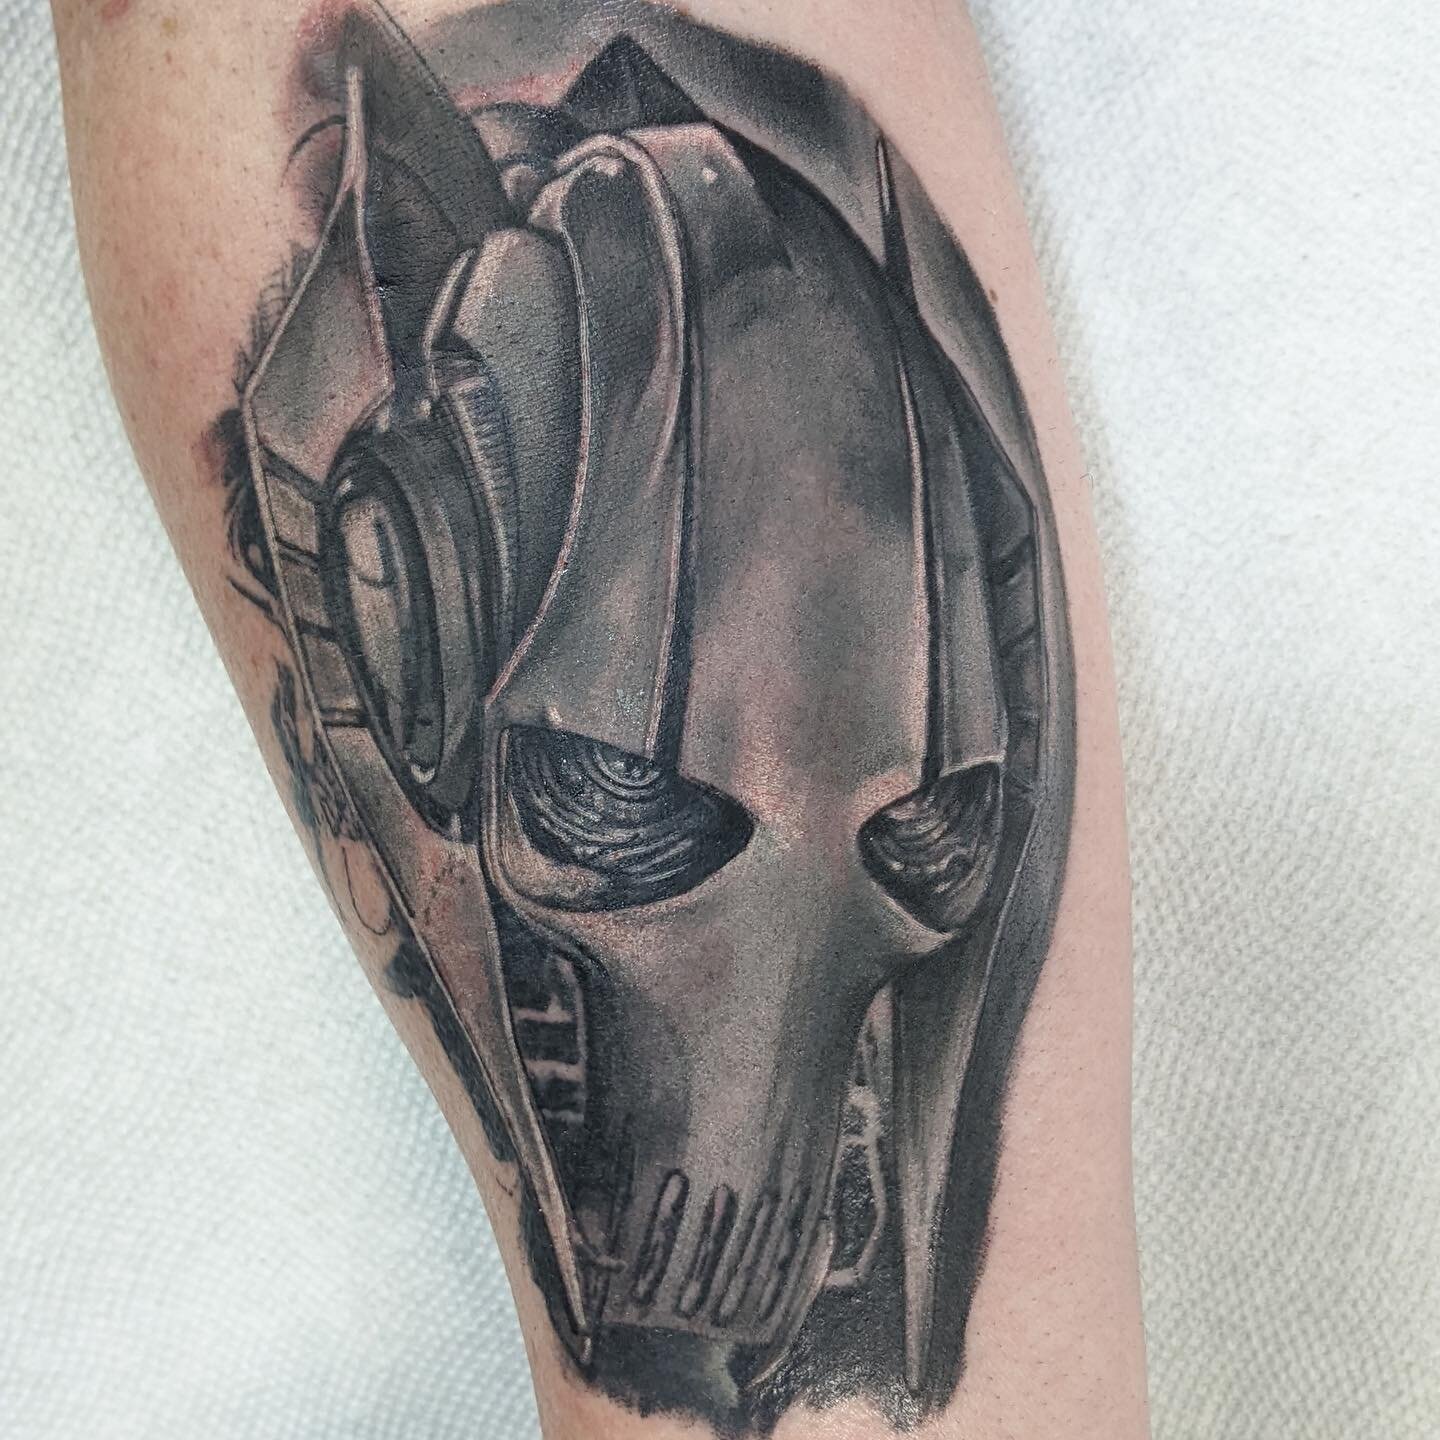 Hello there General Kenobi
This is a work in progress, one more sesh and he&rsquo;s done
Done using @poisoned_machines @crybabytattooproducts @tattcom @industryinks @electrumsupply 
.
.
.
.
.
.
.
.
#starwars #starwarscelebration #starwarstattoo #tatt